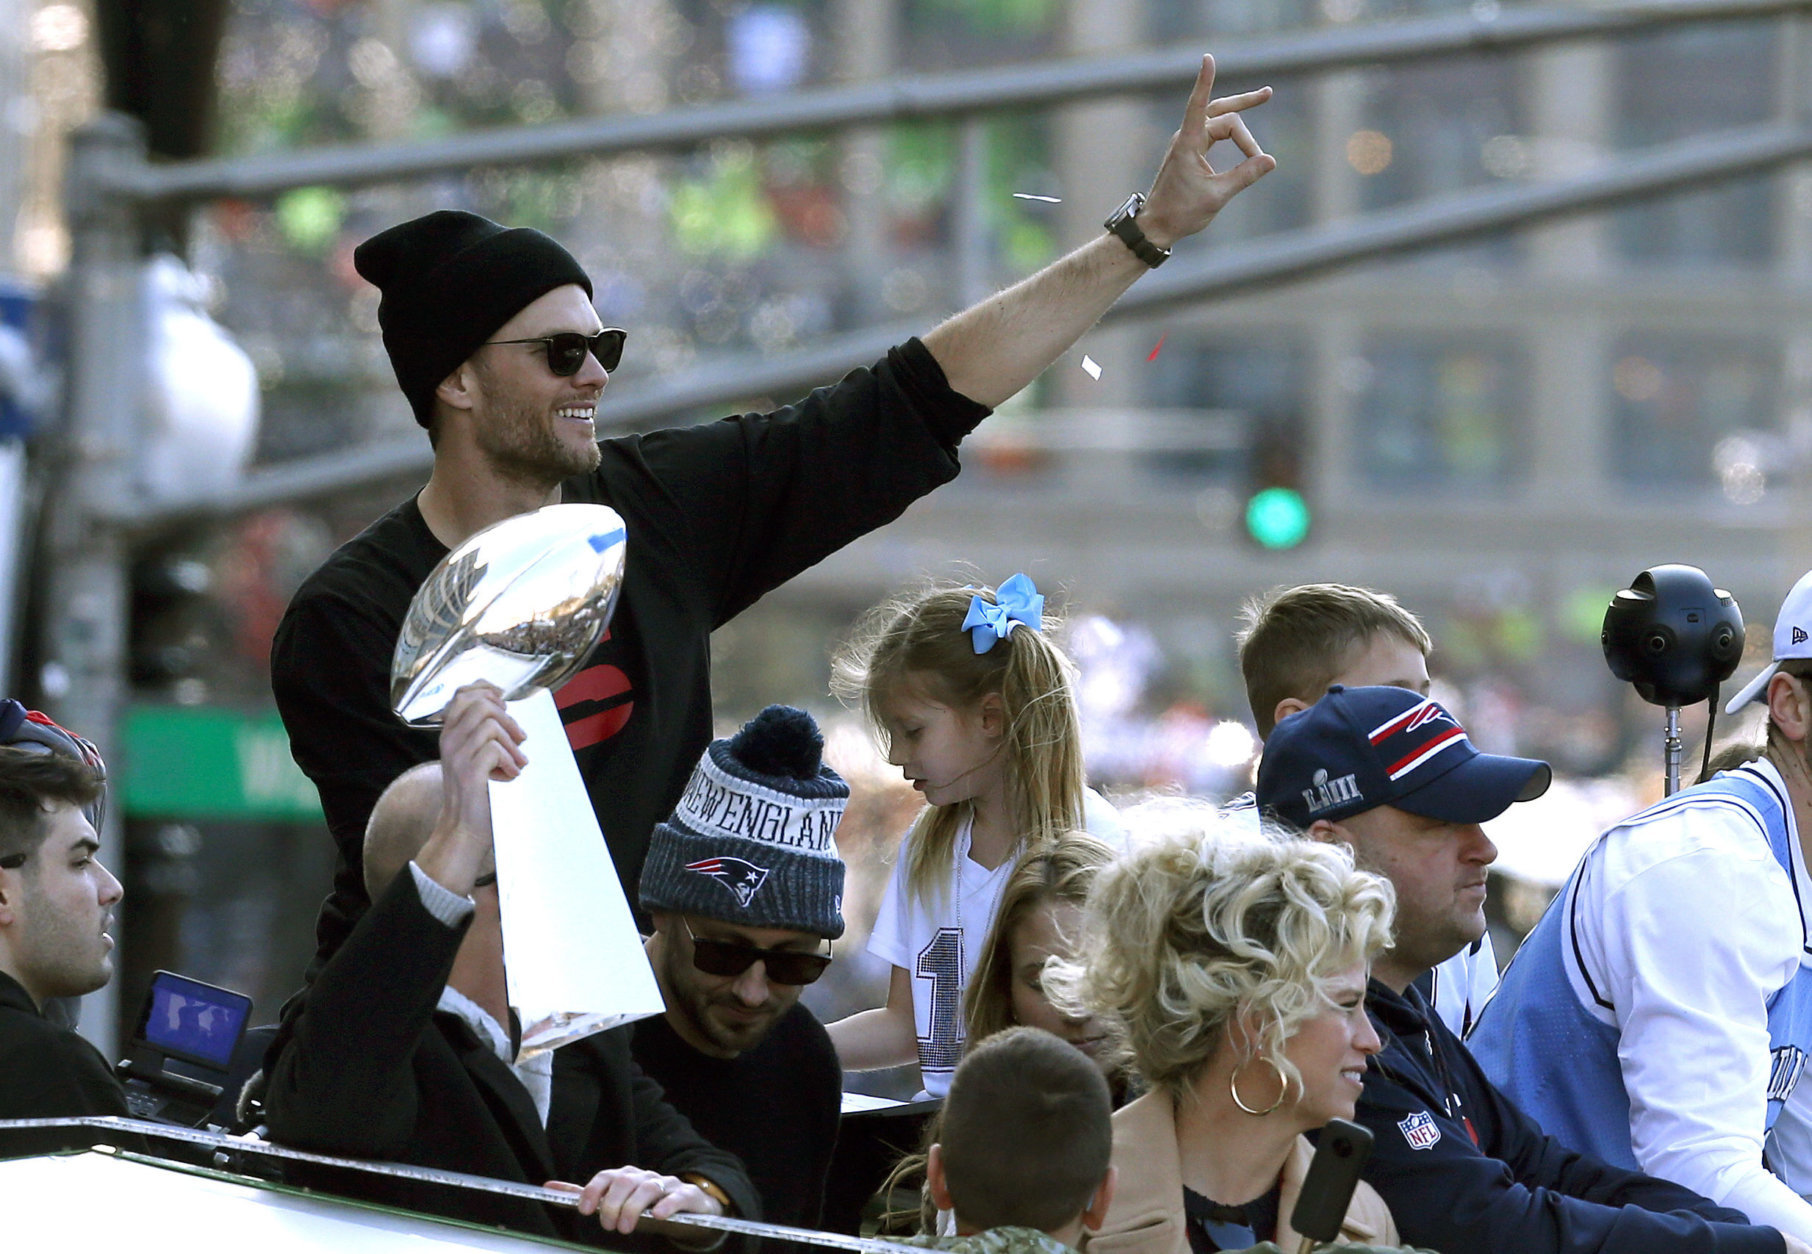 New England Patriots' Tom Brady rides beside the trophy as the team parades through downtown Boston, Tuesday, Feb. 5, 2019, to celebrate their win over the Los Angeles Rams in Sunday's NFL Super Bowl 53 football game in Atlanta. (AP Photo/Michael Dwyer)